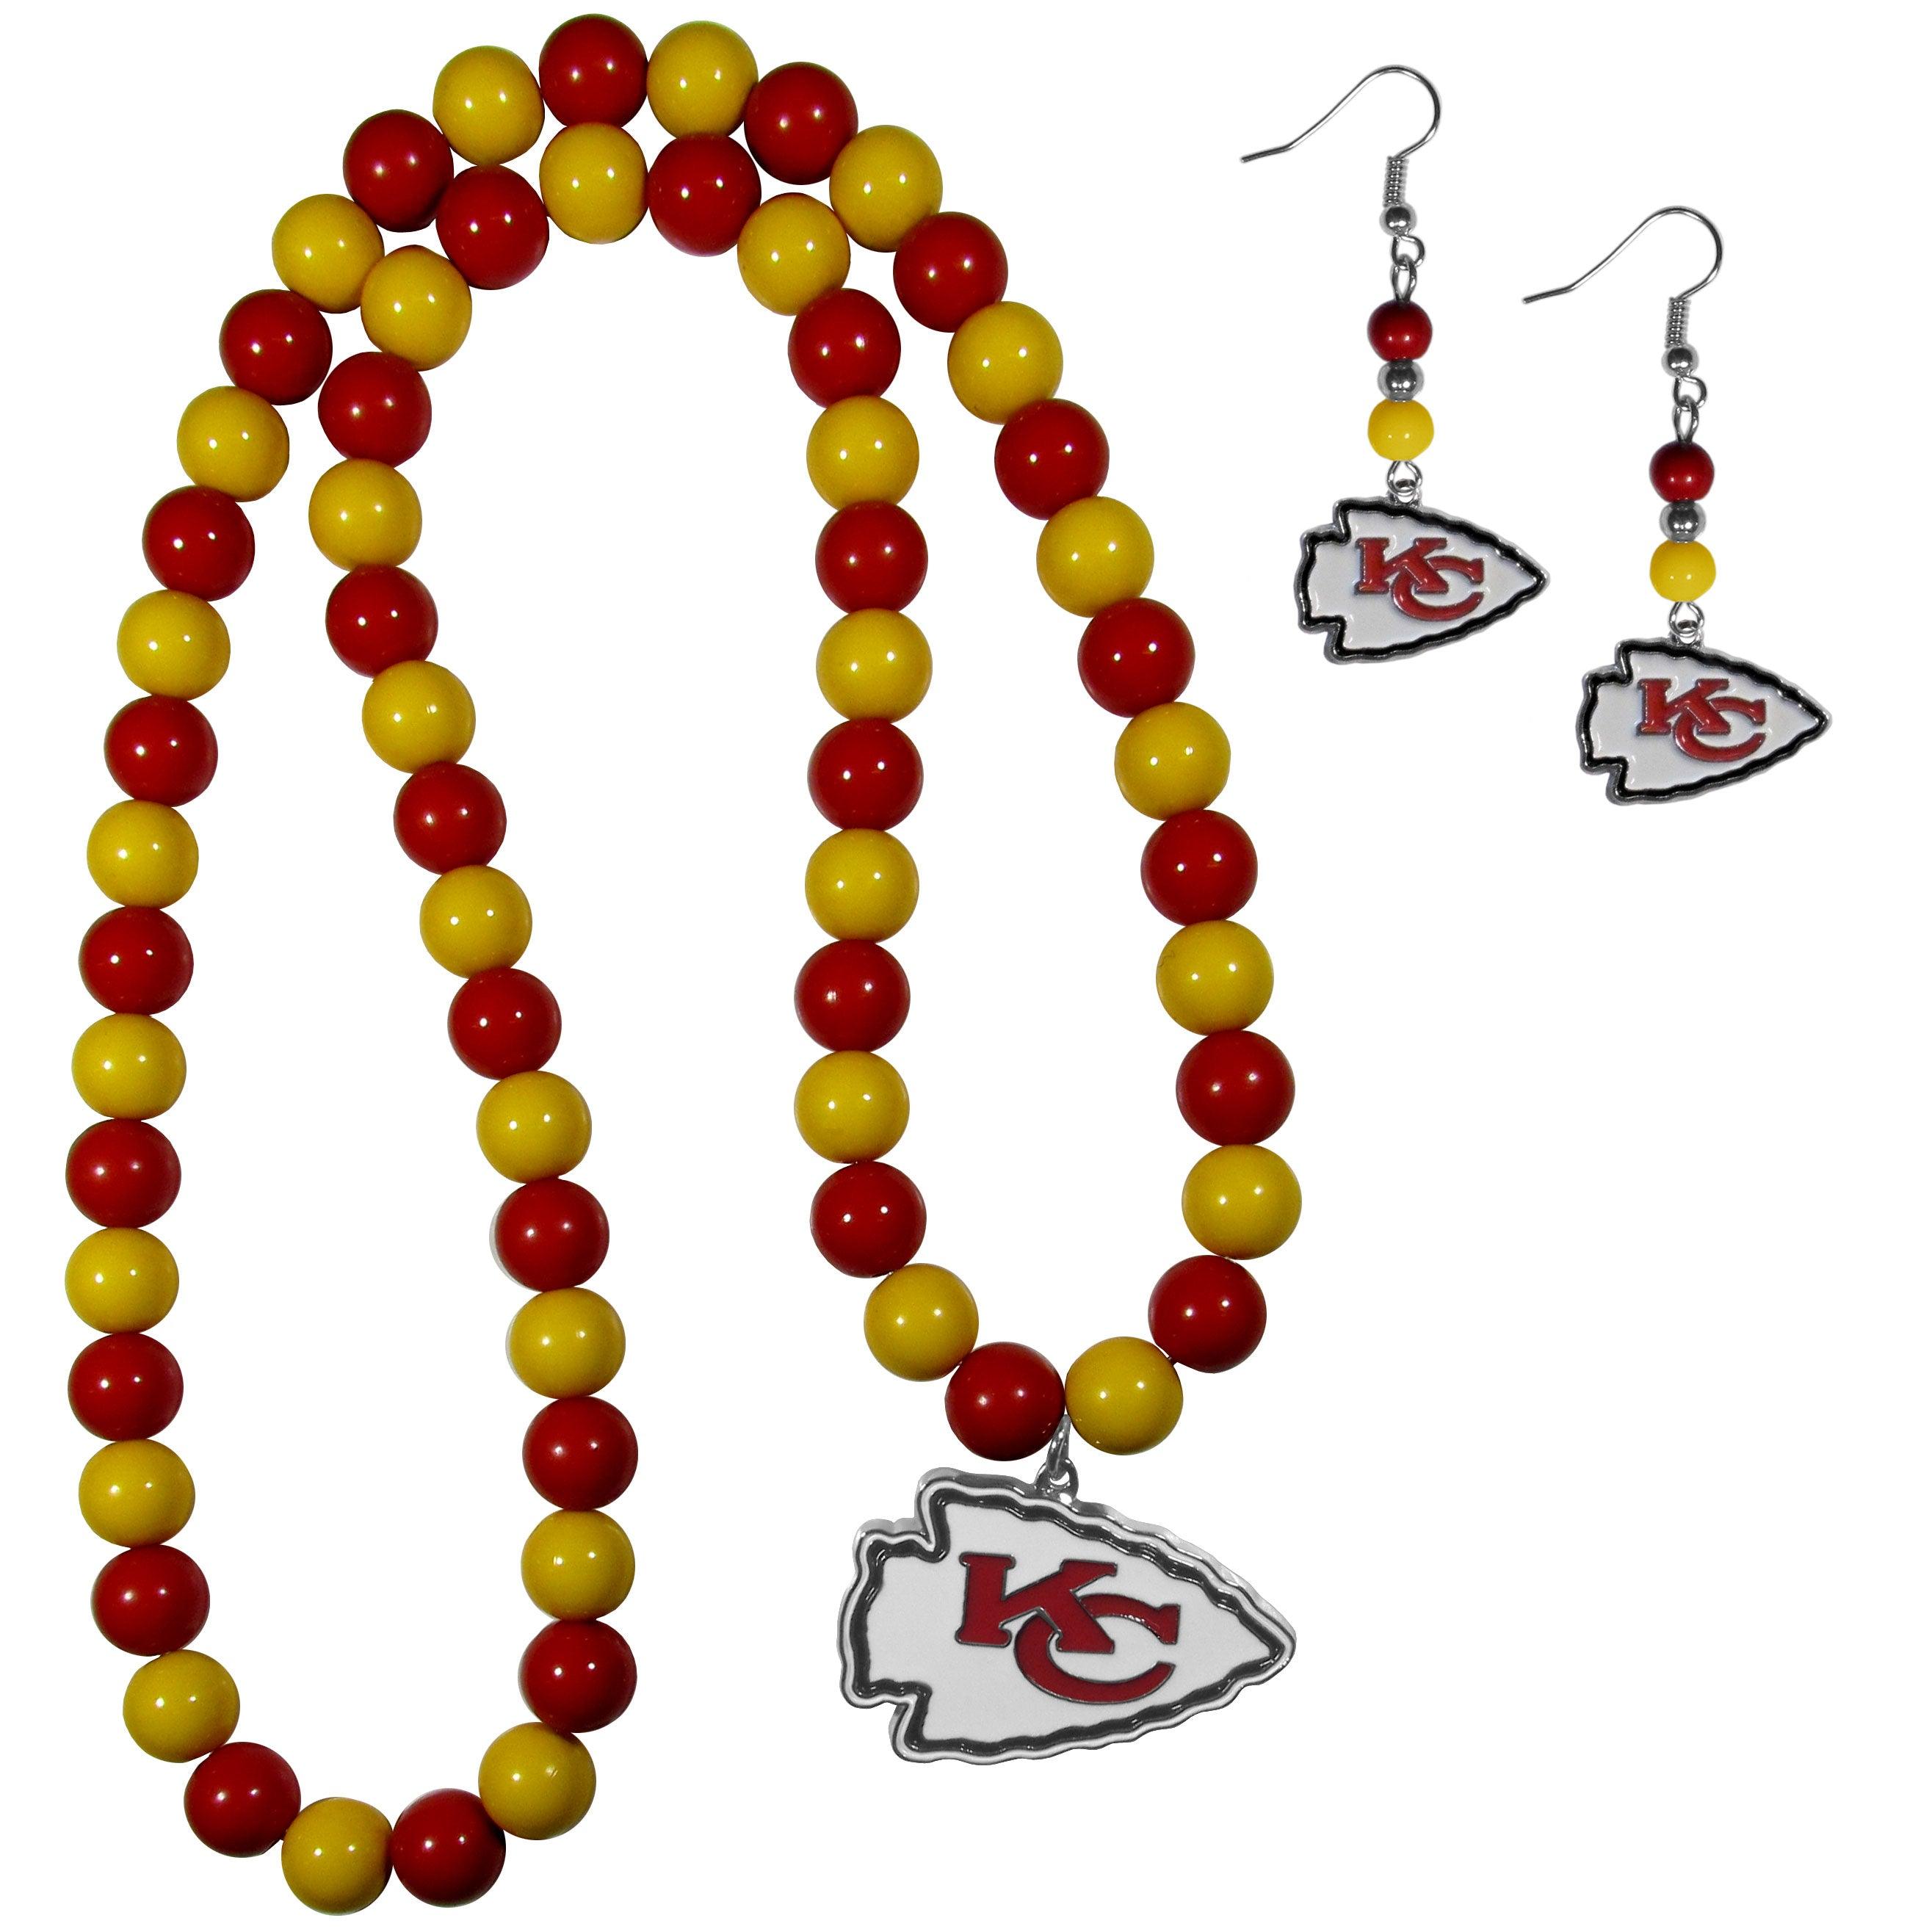 Kansas City Chiefs Fan Bead Earrings and Necklace Set - Flyclothing LLC